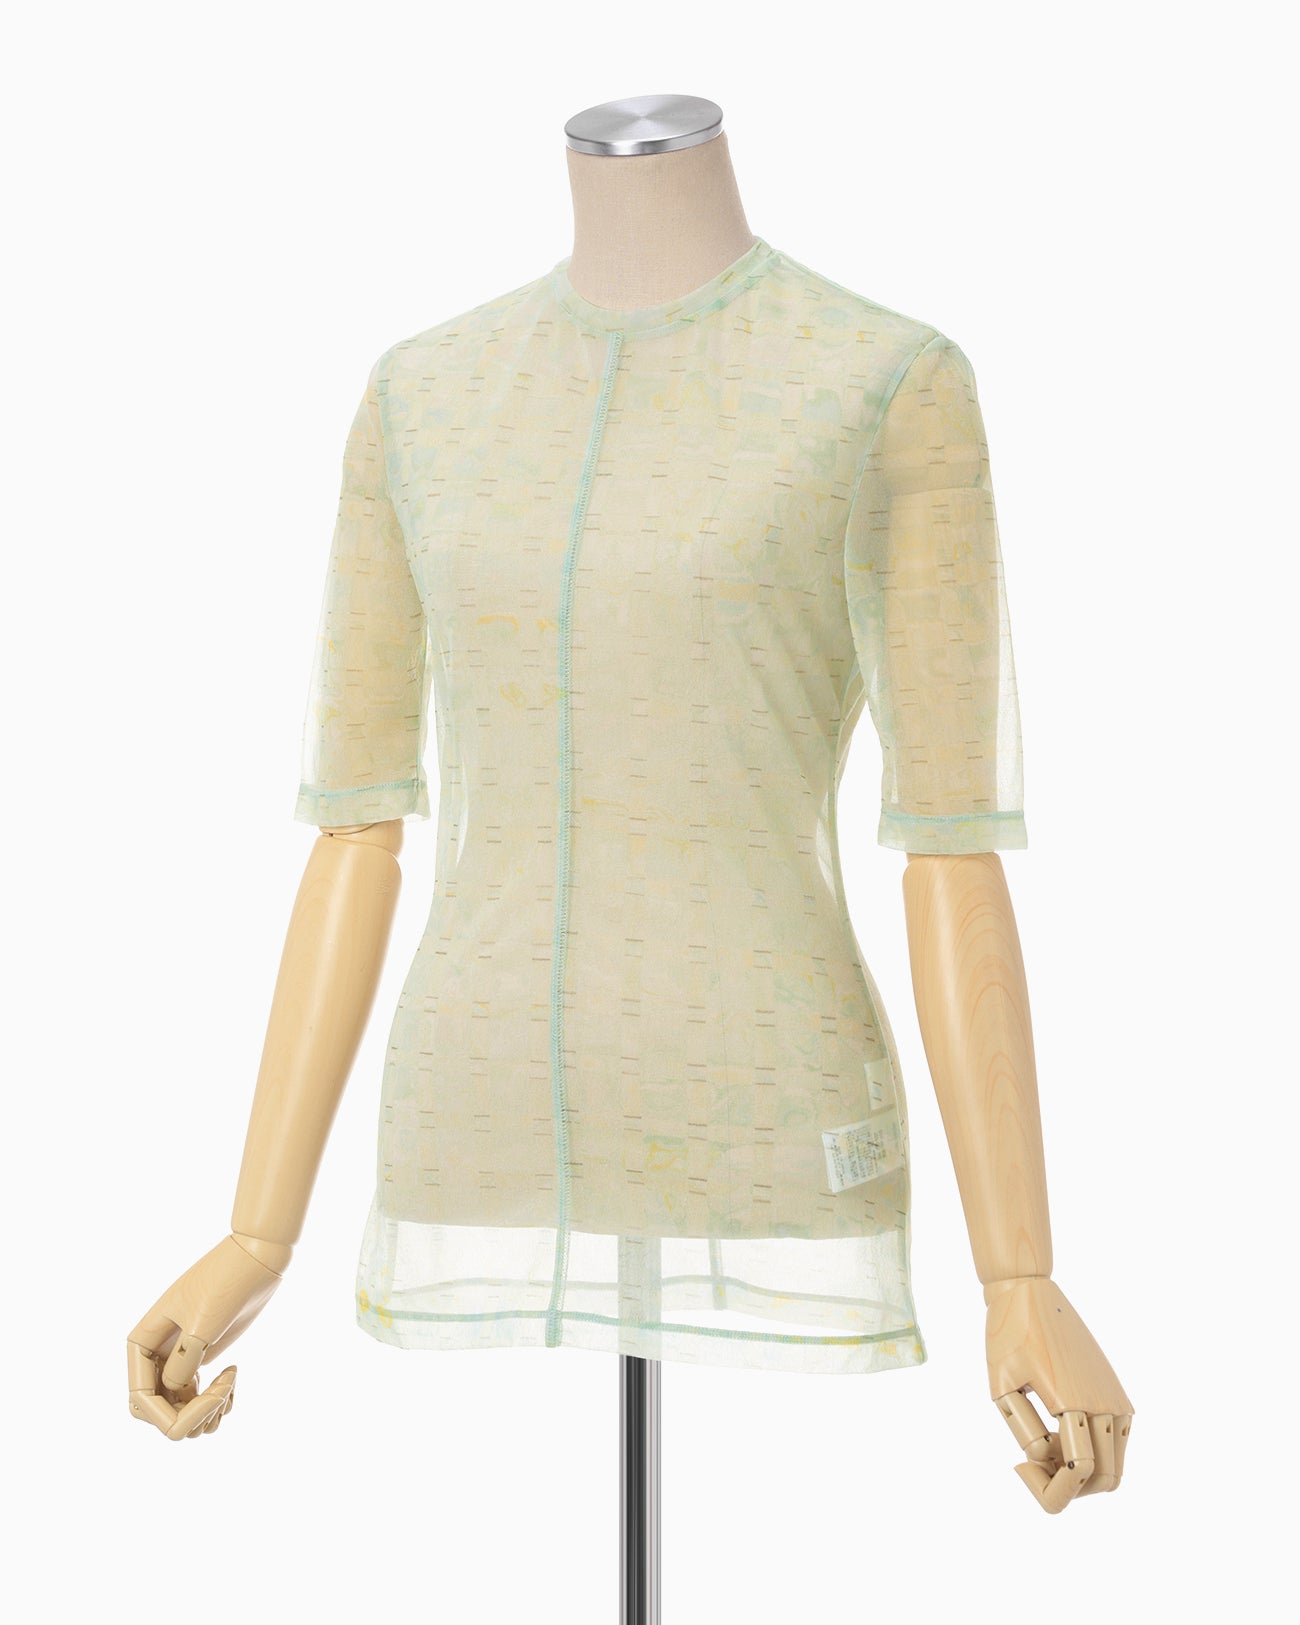 Marble Printed Plaid Sheer Crew Neck Top - mint green